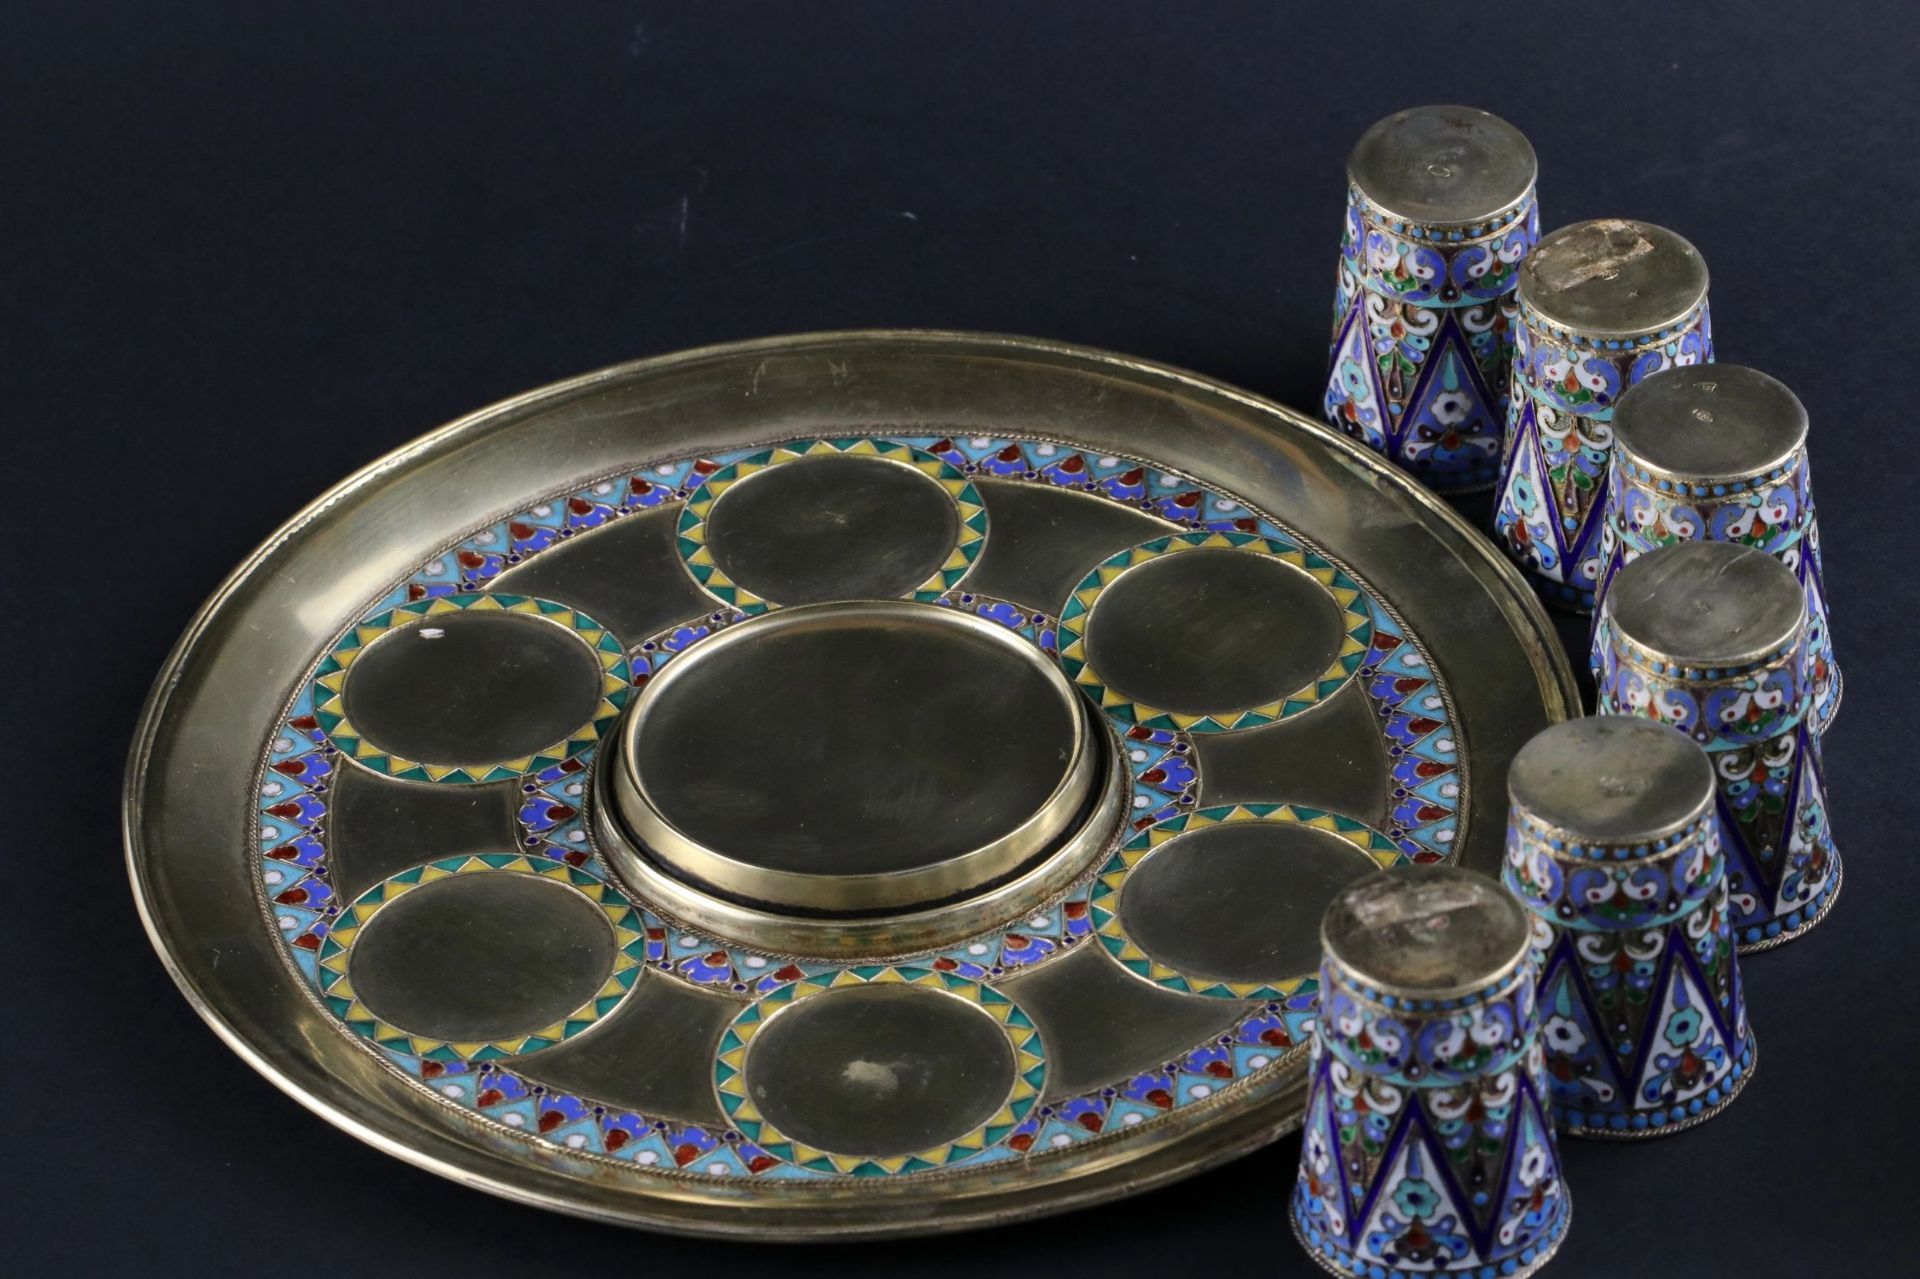 Luxurious vodka set of Russian silver with enamel. - Image 6 of 9